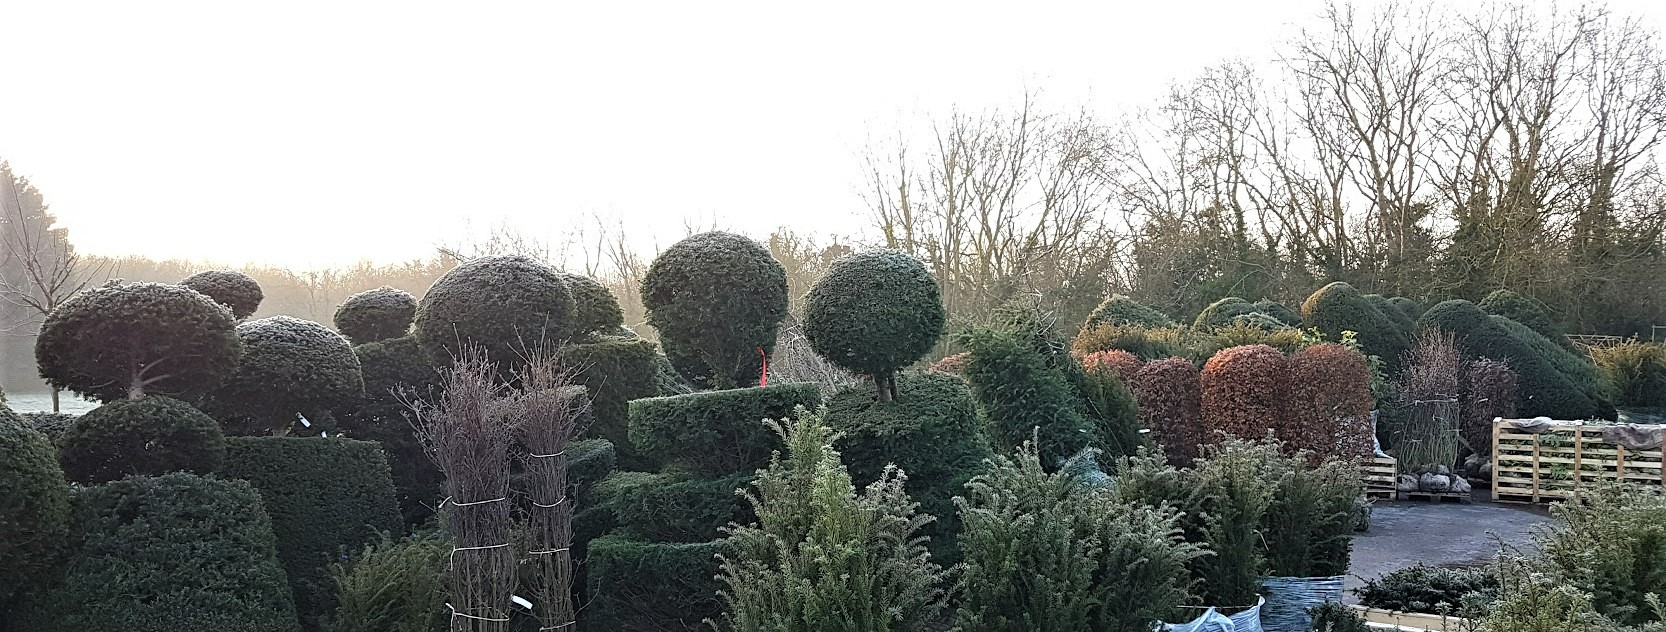 A sellection of large topiary plants in a yard at Kingsdown Nurseries, a wholesale plant nursery based in Swindon, Wiltshire.